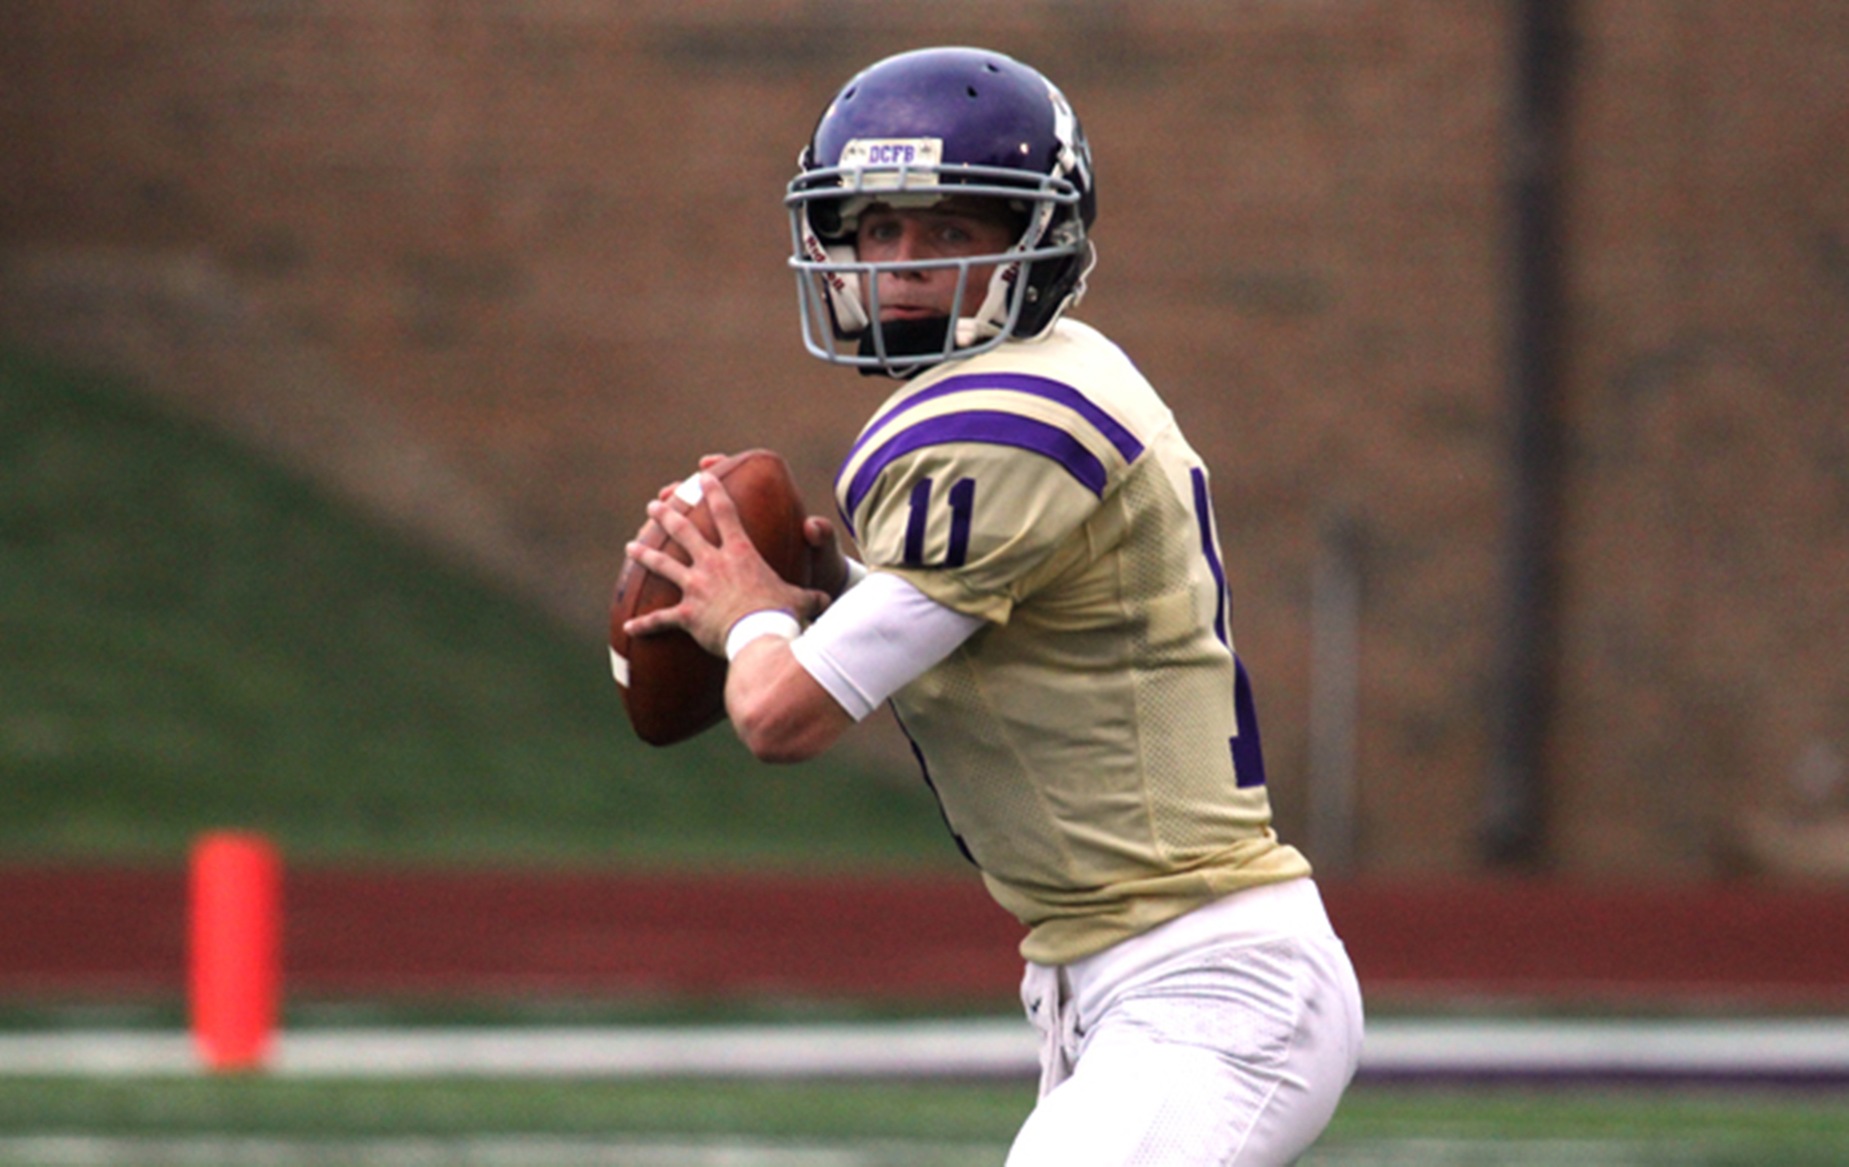 Larson Named HCAC Offensive Player of the Week